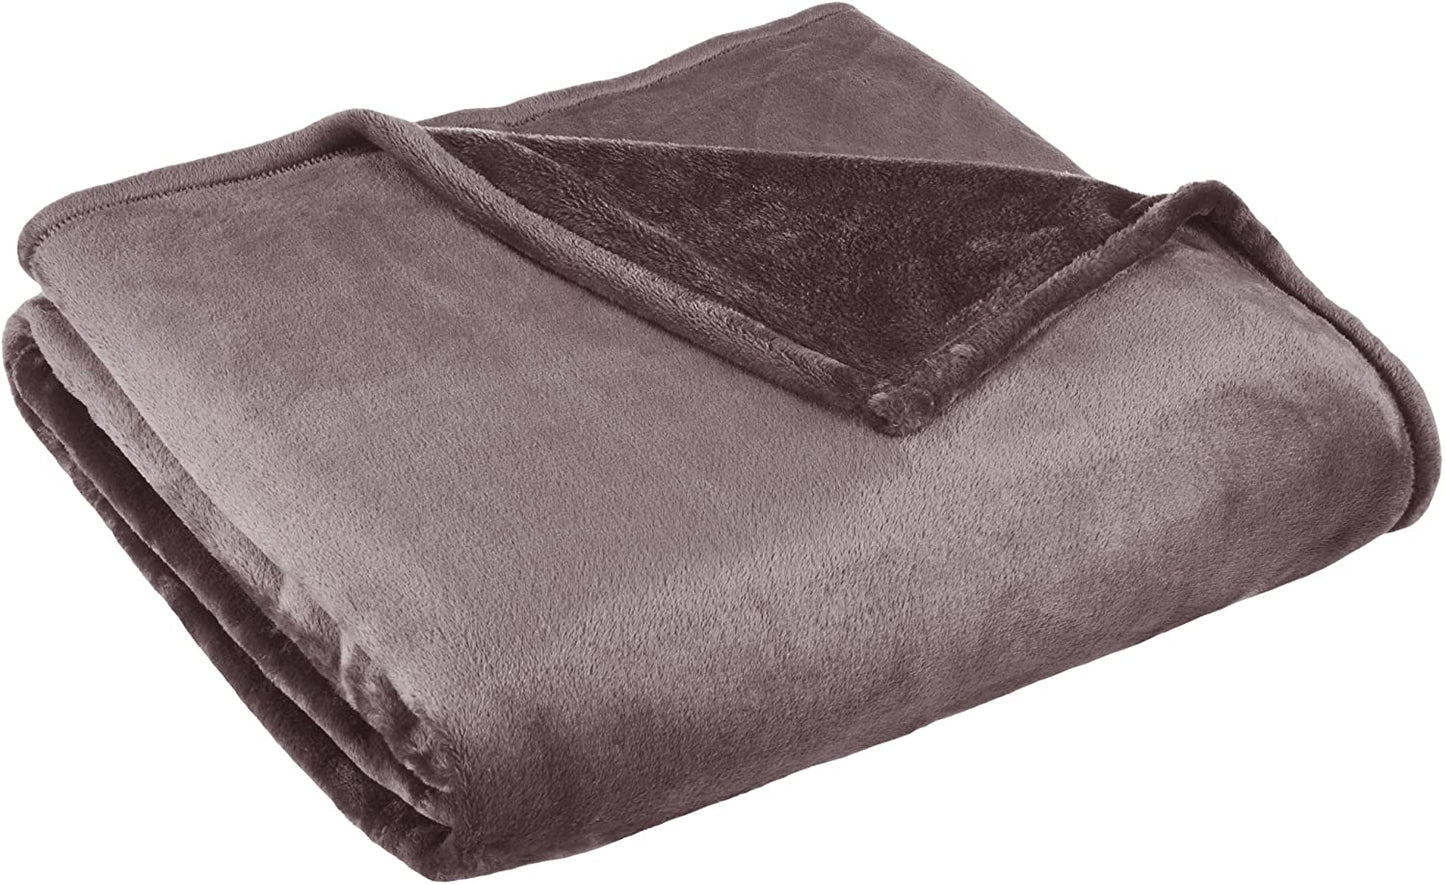 Thesis Cashmere Plush Blanket Full/Queen - Charcoal